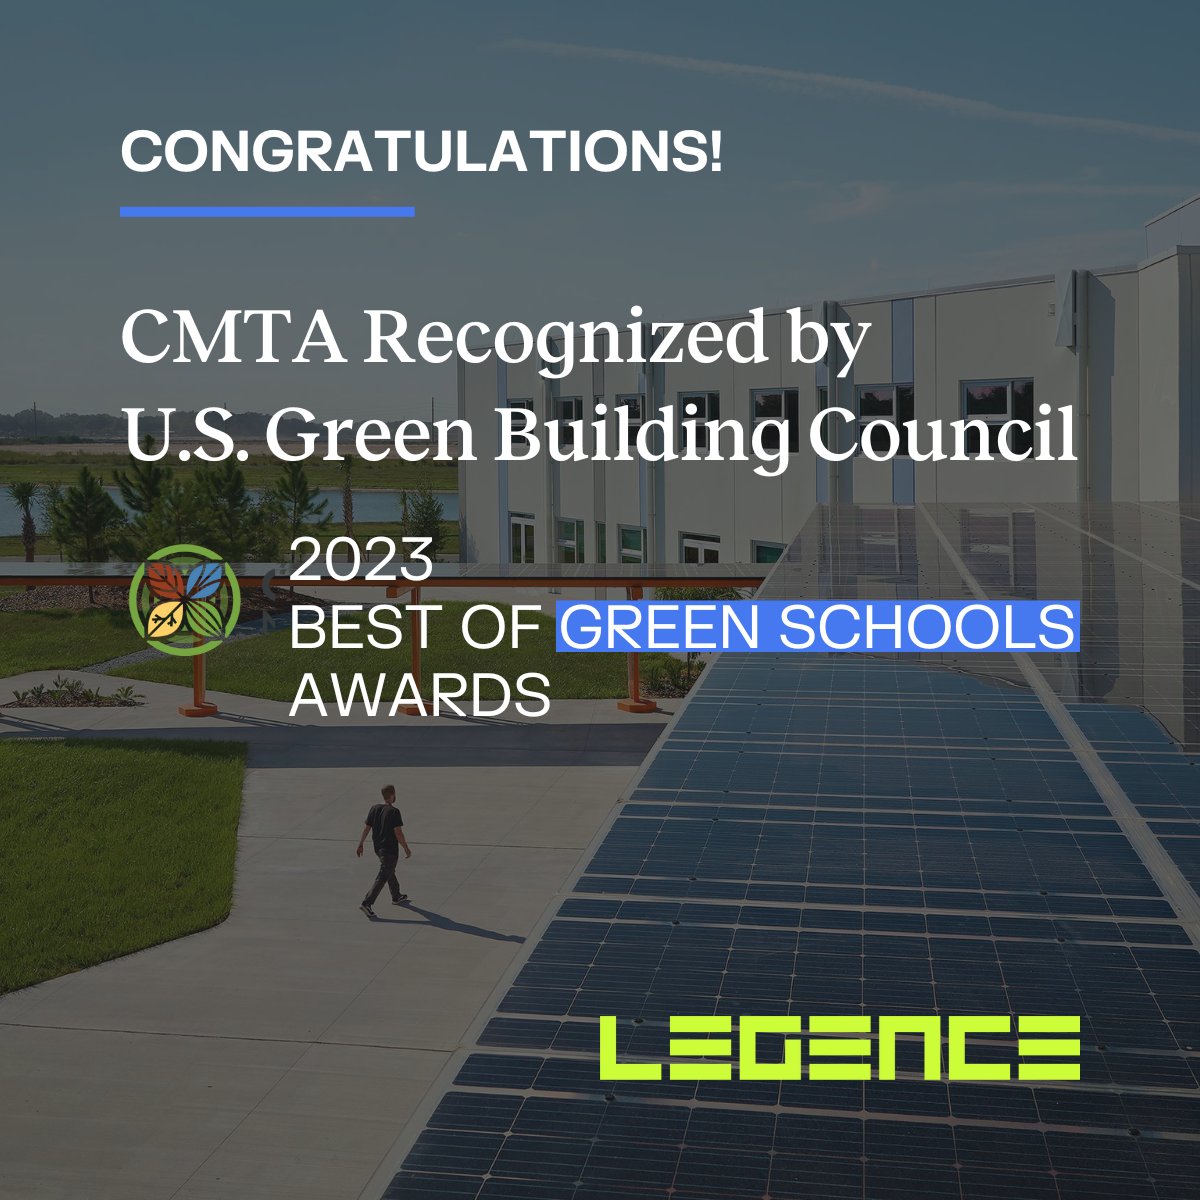 We're proud to announce the recognition of @CMTAEngineers as a winner in the 'Best of Green Schools' 2023 class by @GreenSchoolsNN, @mygreenschools & @USGBC! This work is important for ensuring students have healthier & sustainable schools: bit.ly/3EJZkJu

#WeAreLegence